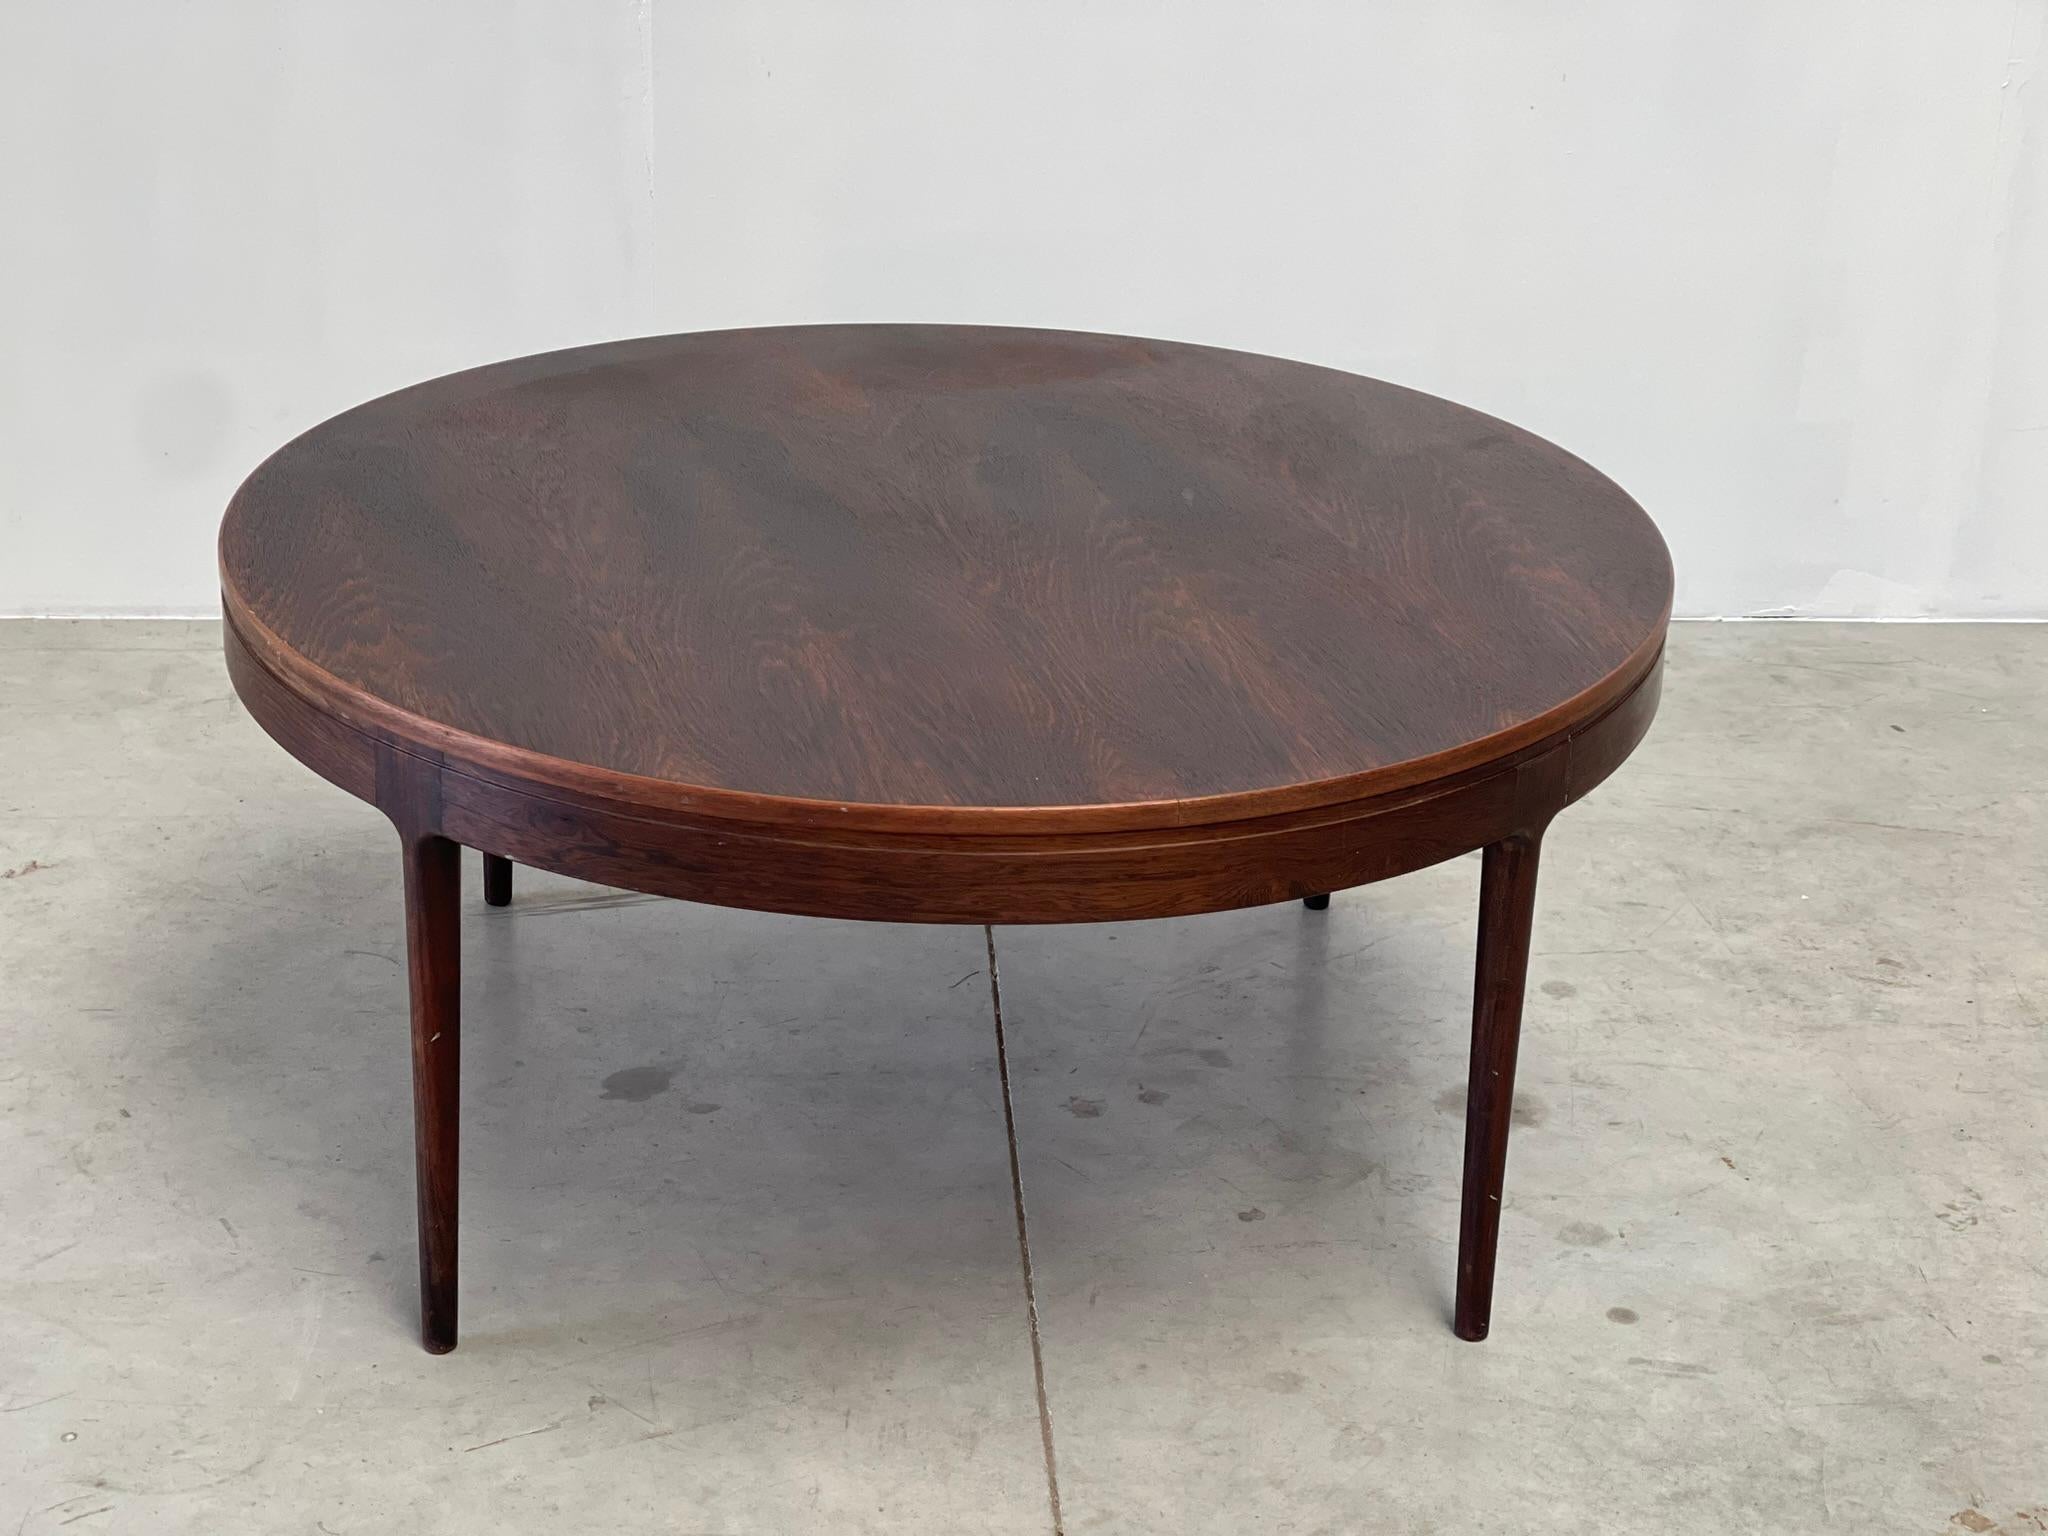 Mid century modern coffee table designed by Ole Wasnscher for AJ Iversen made from Rosewood.

Beautifully crafted crame in very good condition

Very elegant scandinavian design piece.

1950s - Denmark

Dimensions:
Height: 45cm/17.71